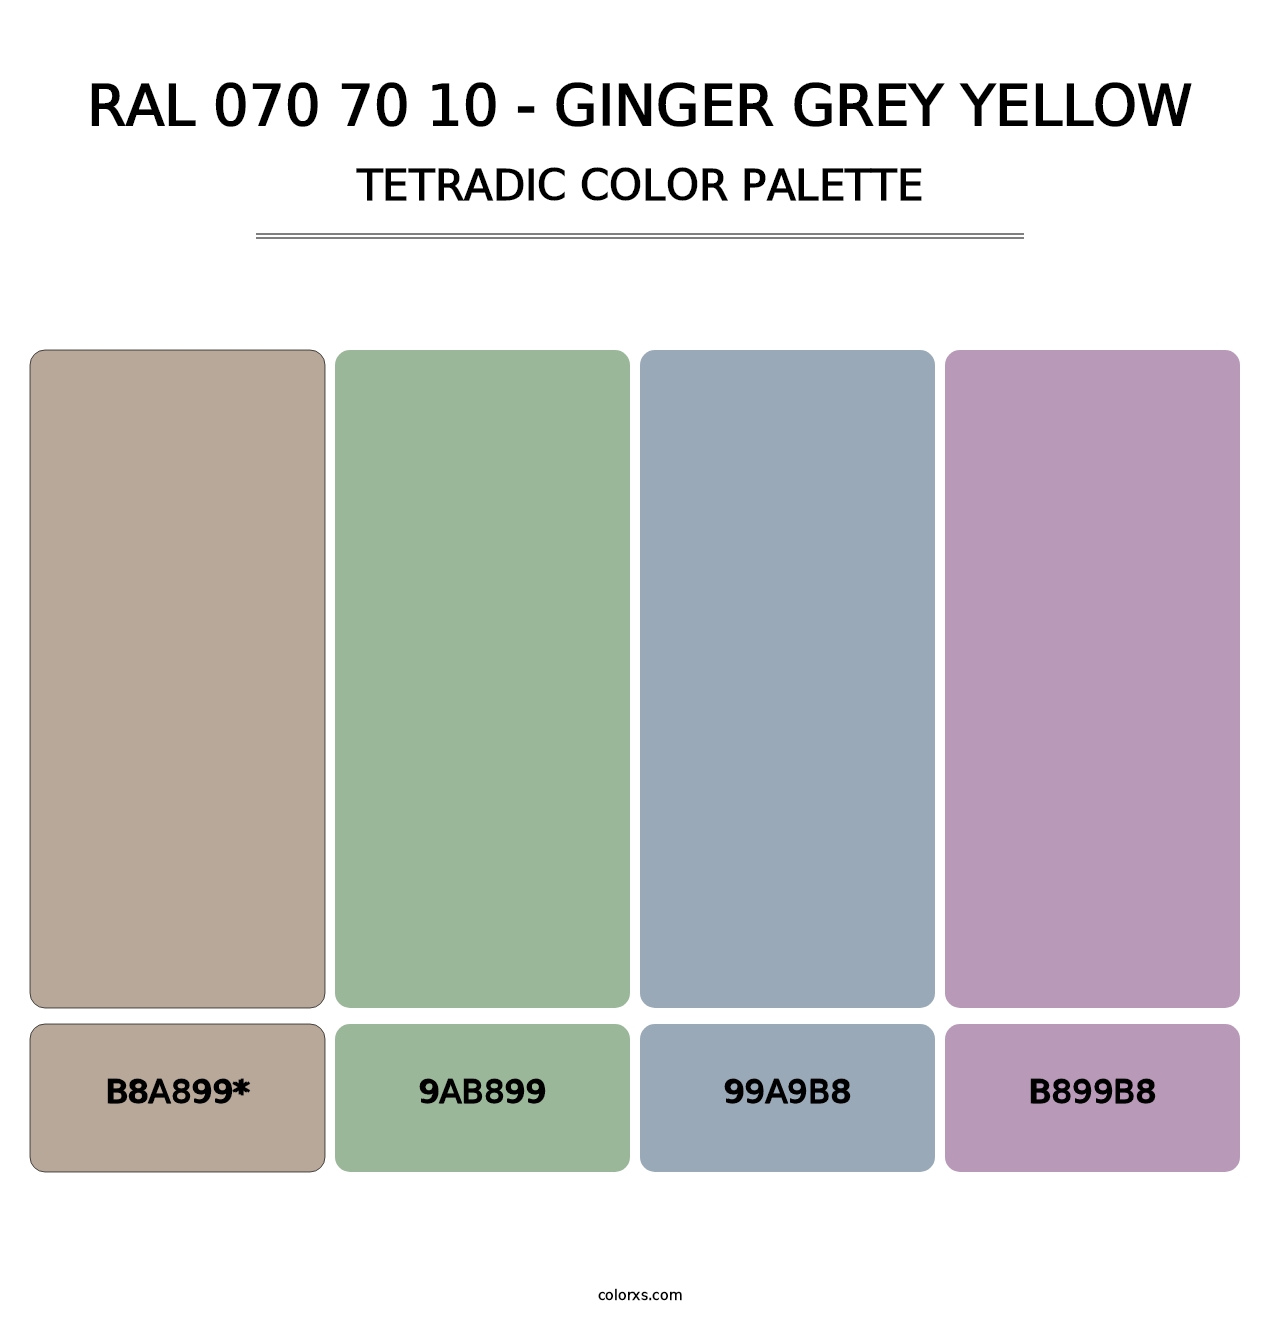 RAL 070 70 10 - Ginger Grey Yellow - Tetradic Color Palette